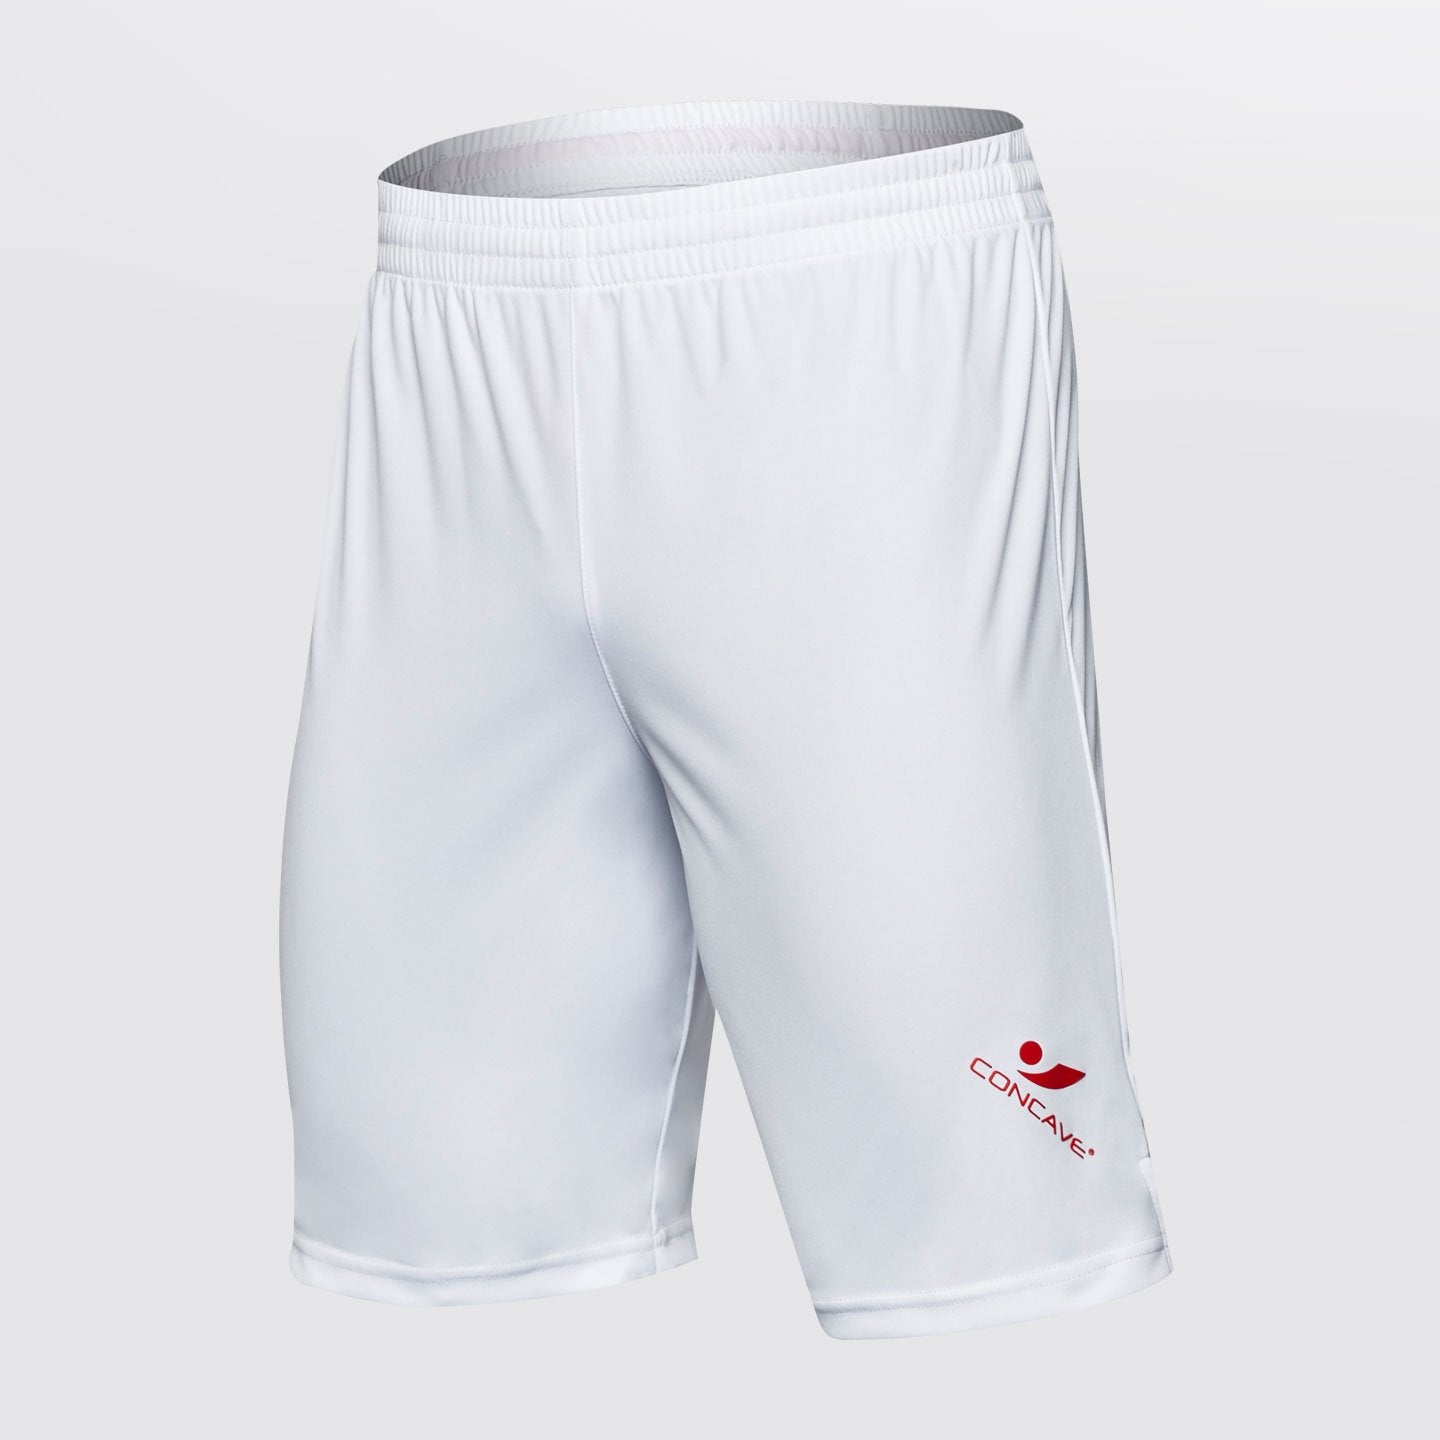 Concave Performance Shorts - White/Red